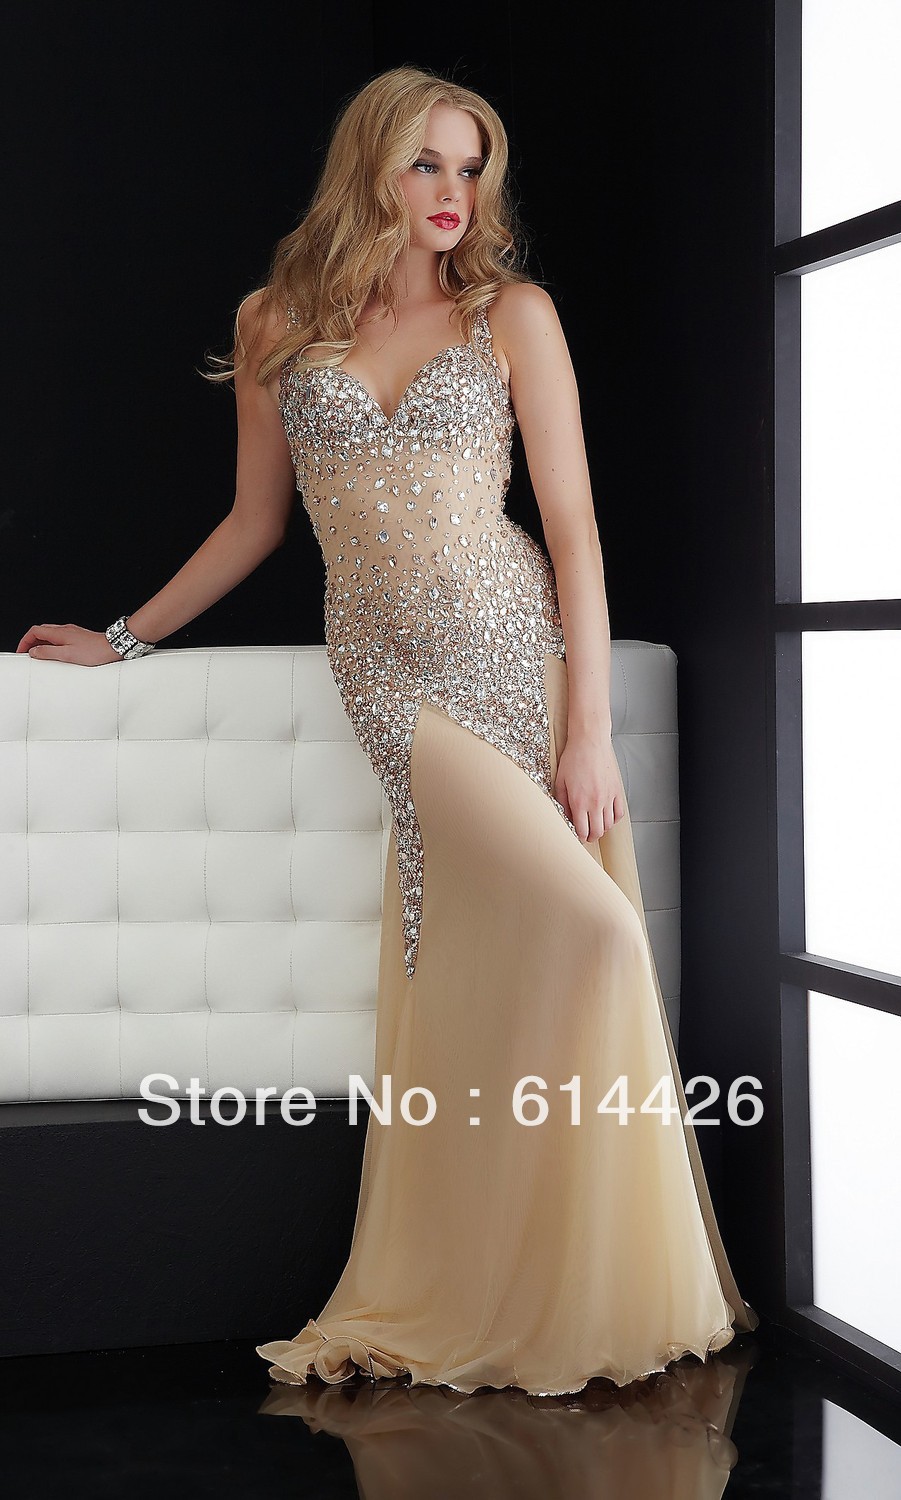 Custom made Crystal Beading Backless Sexy Prom dress Formal evening party dresses gown retail and wholesale